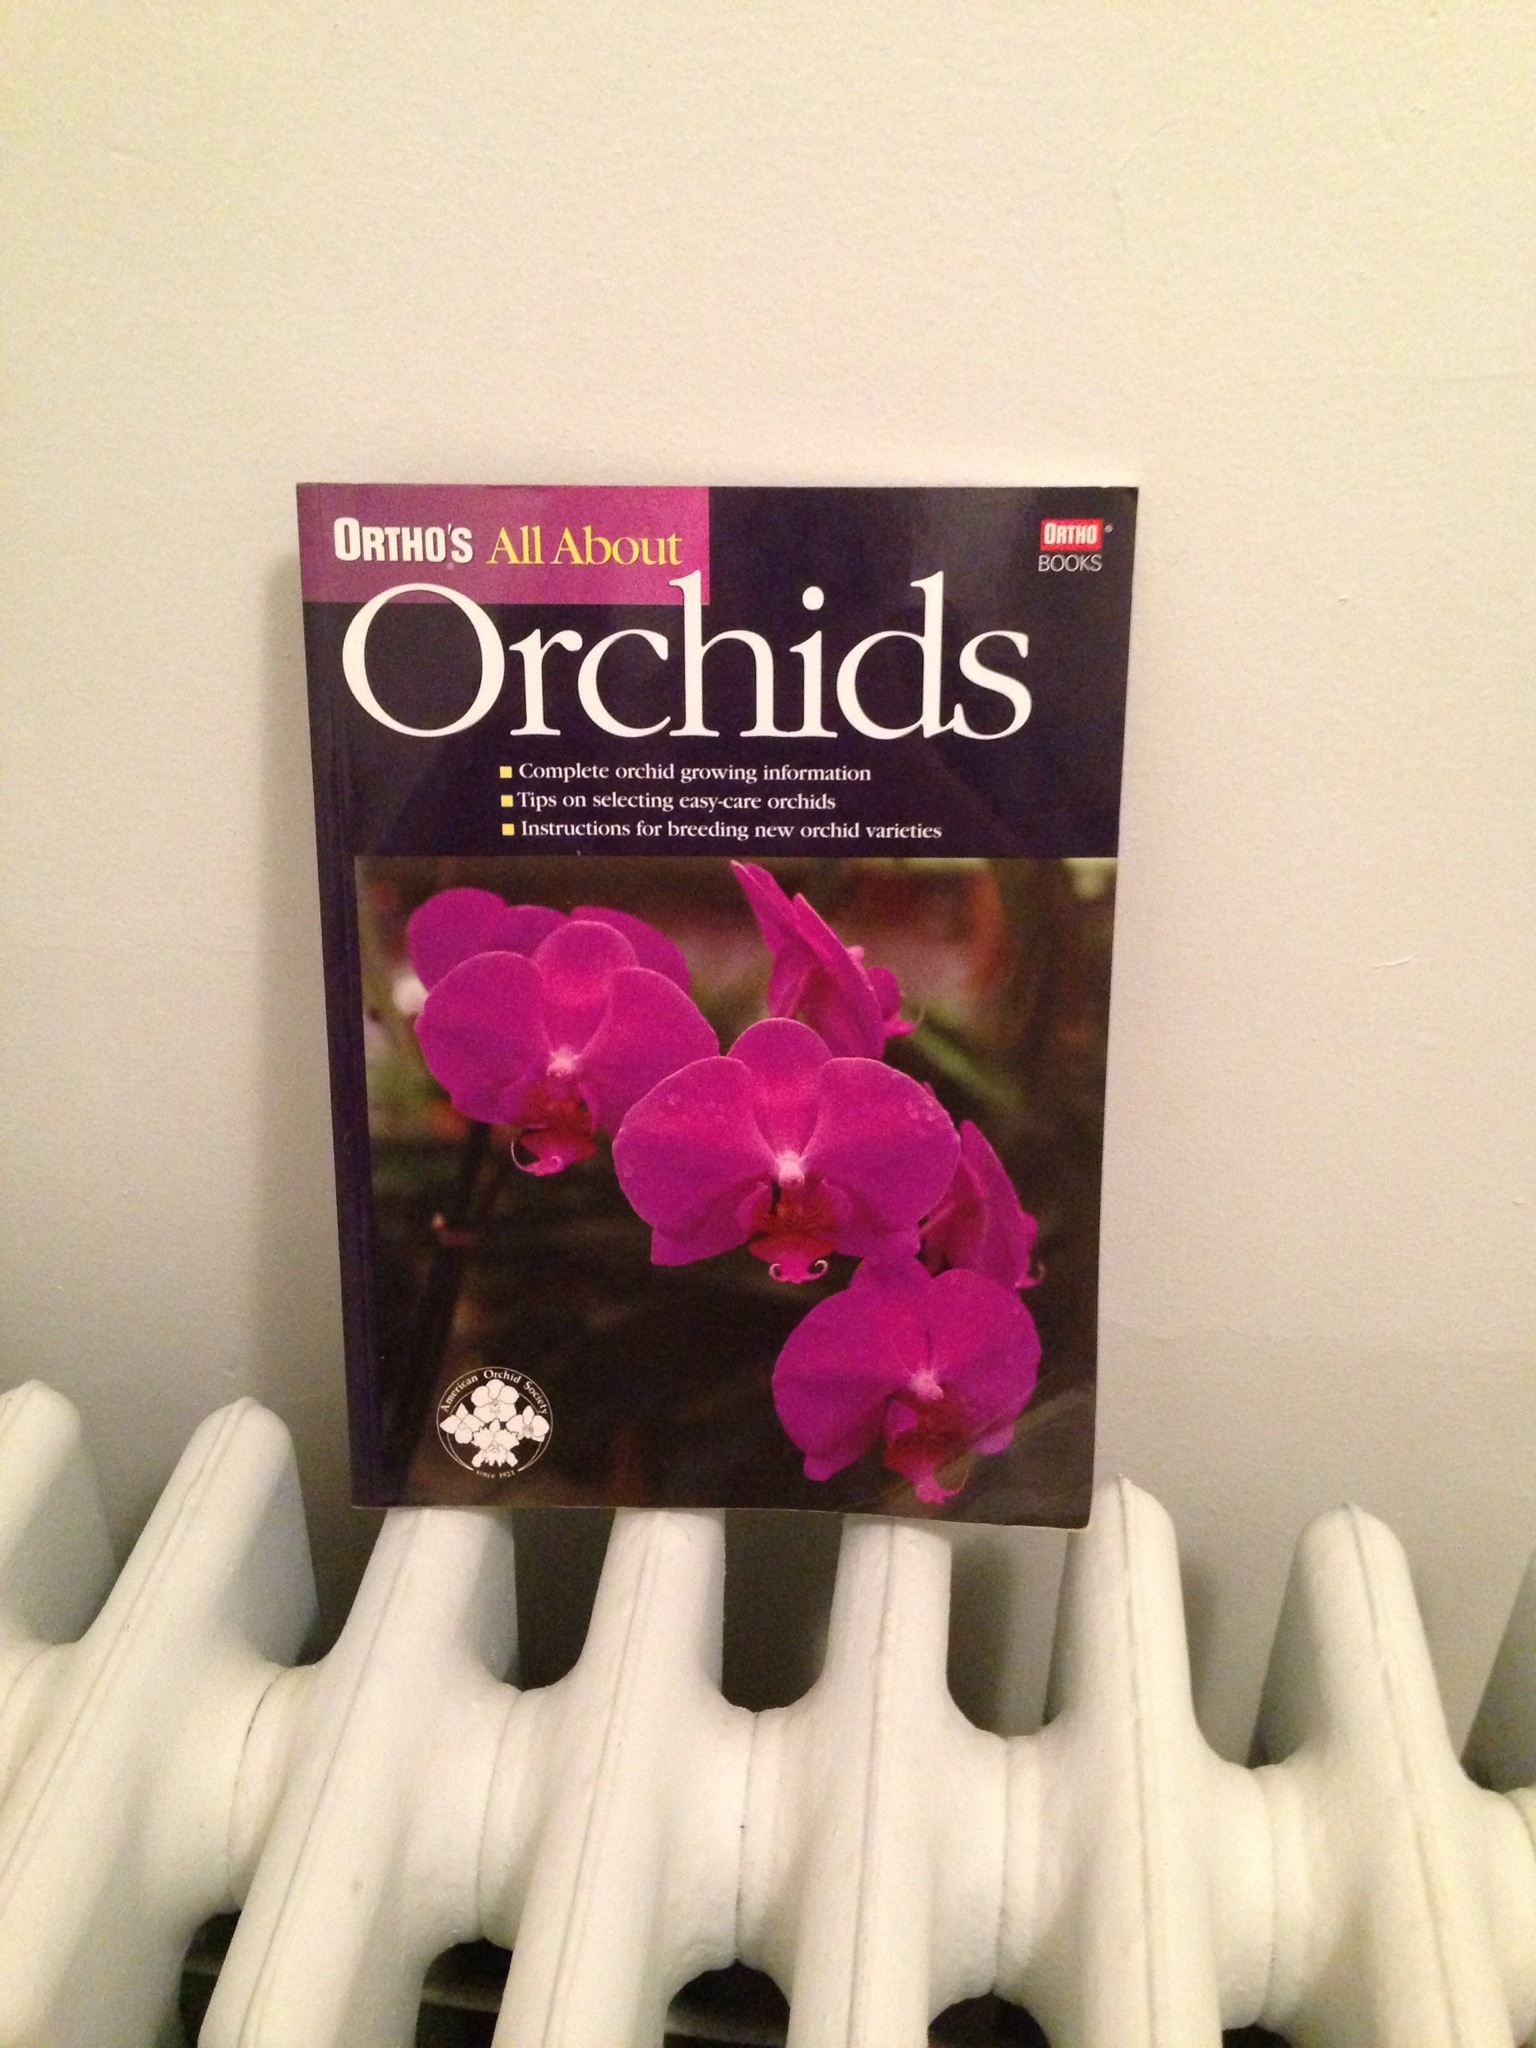 Book on orchids